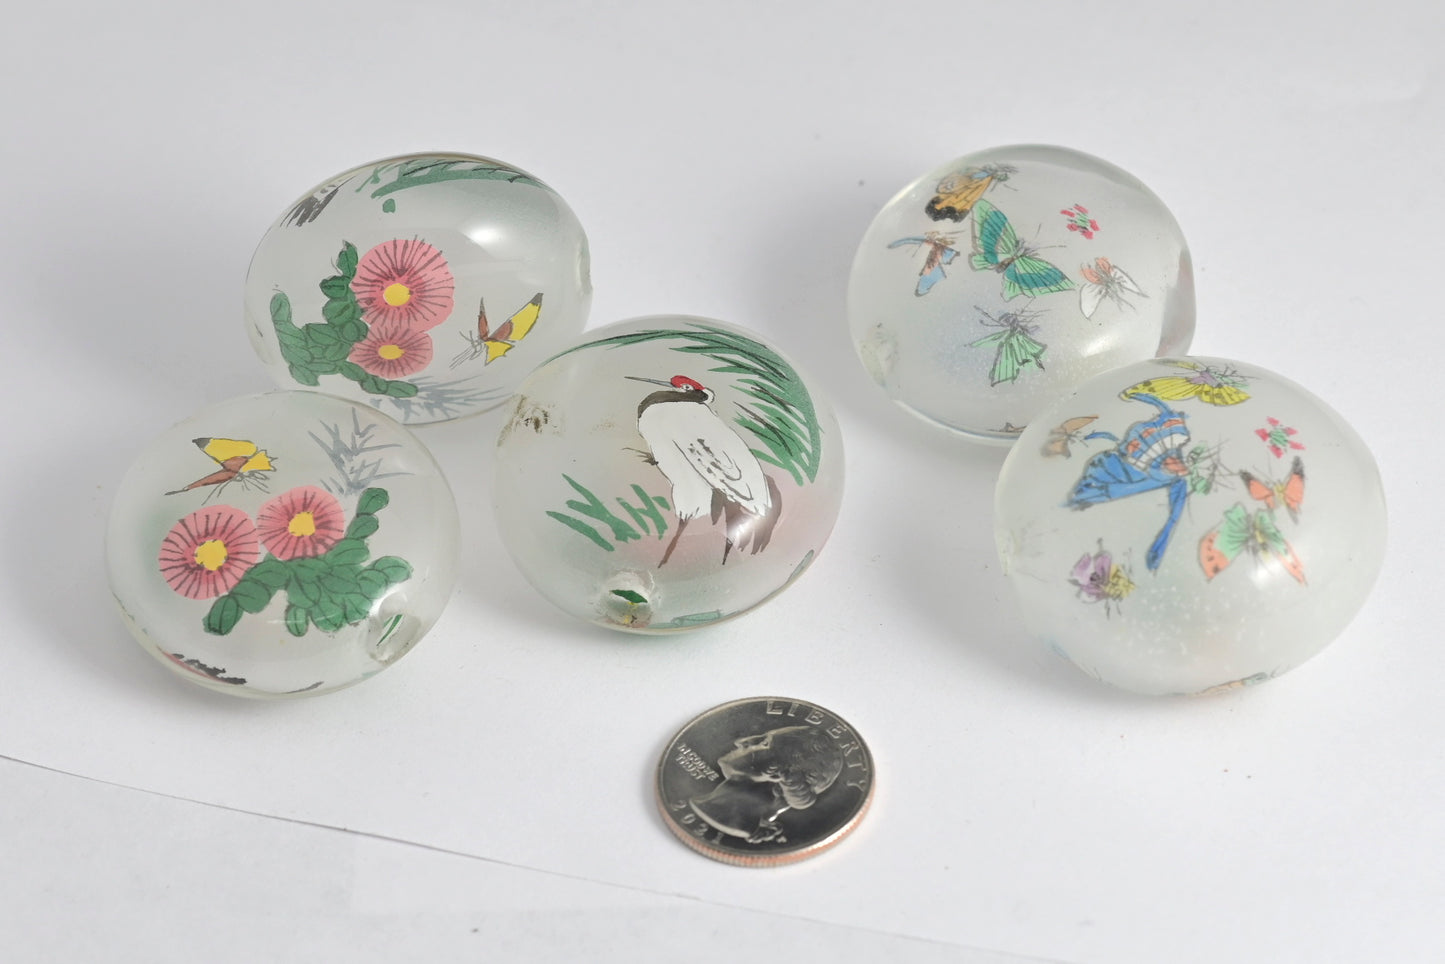 Reverse Painted Glass Pancake Beads Crane & Floral or Butterflies